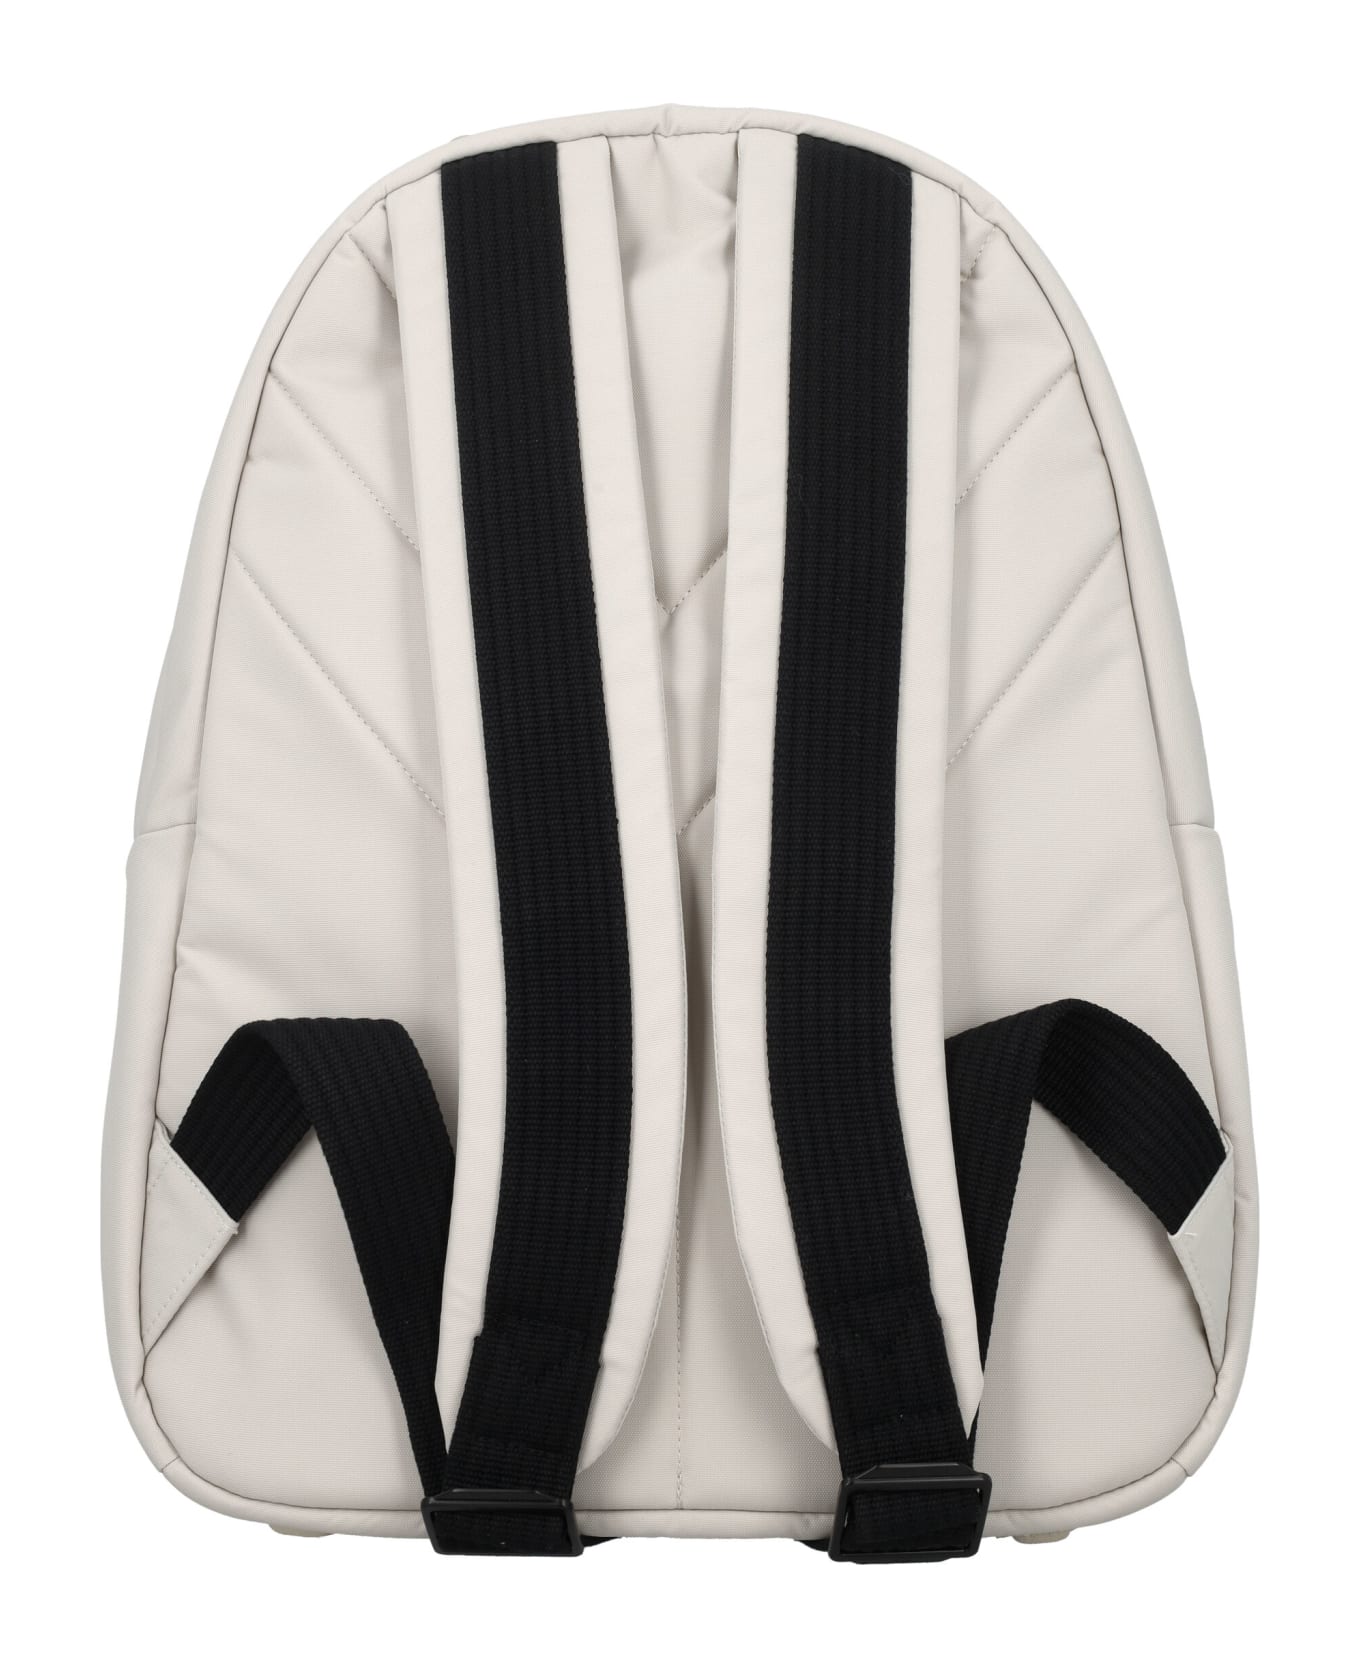 Y-3 Lux Backpack - Talco